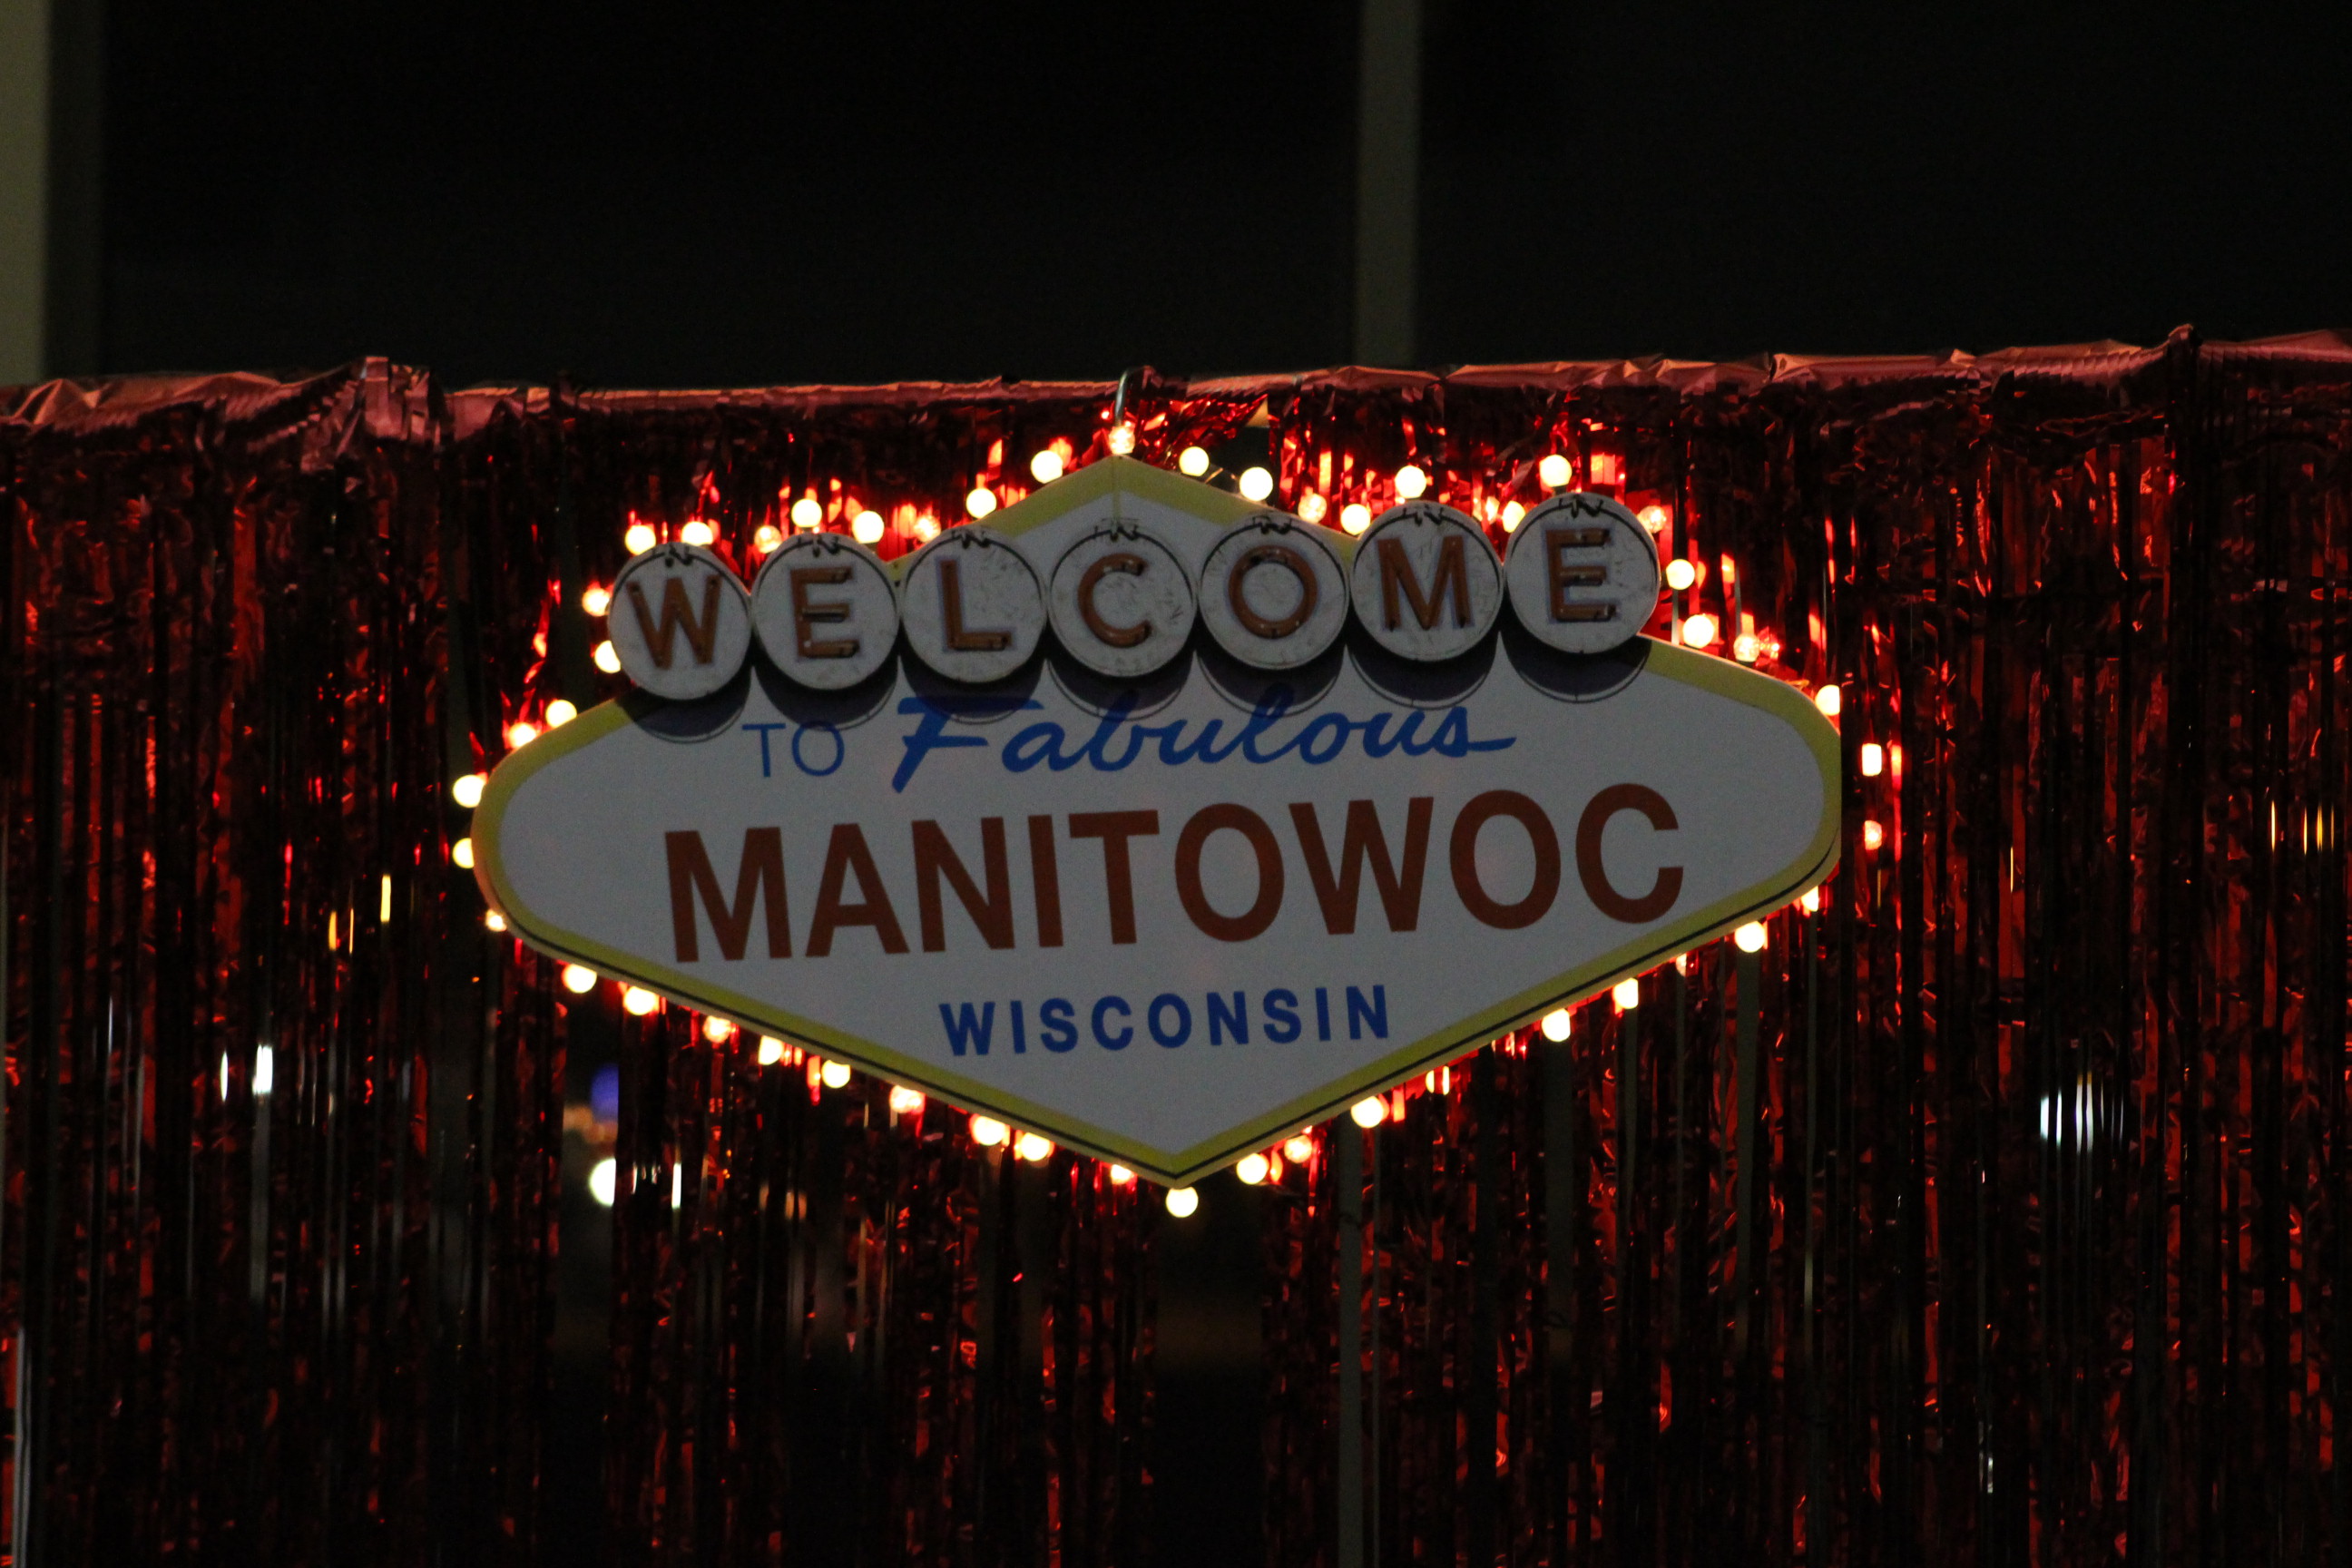 "Welcome to Fabulous Manitowoc Wisconsin" Vegas-style sign